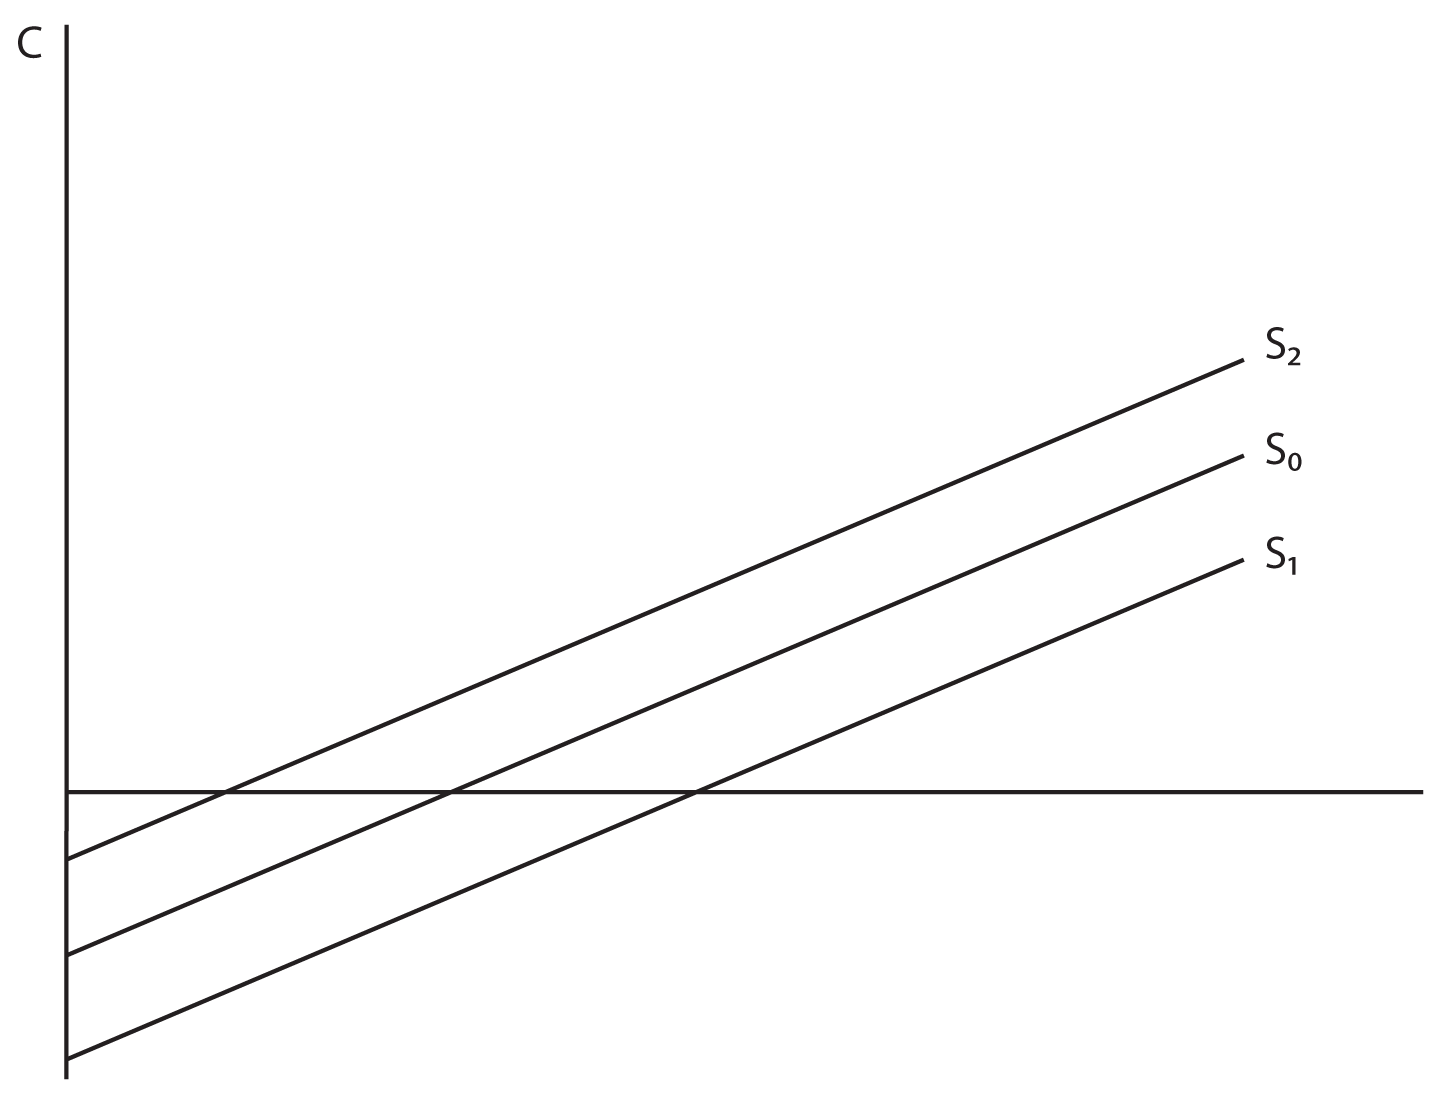 Image 6.05. This graph and depicts the Y axis labeled as C. A line that is not labeled extends horizontally from the lower half of the Y axis. Below this horizontal line, three lines that are parallel to each other and spaced out equally each touch a different point on the Y axis. These three lines all follow an increasing slope and extend past the horizontal line. The line that is located lowest on the Y axis is labeled S subscript 1. The middle line, which is a little higher on the Y axis, is labeled S subscript 0. The line that is located highest on the Y axis, though still lower than the horizontal line, is labeled S subscript 2.